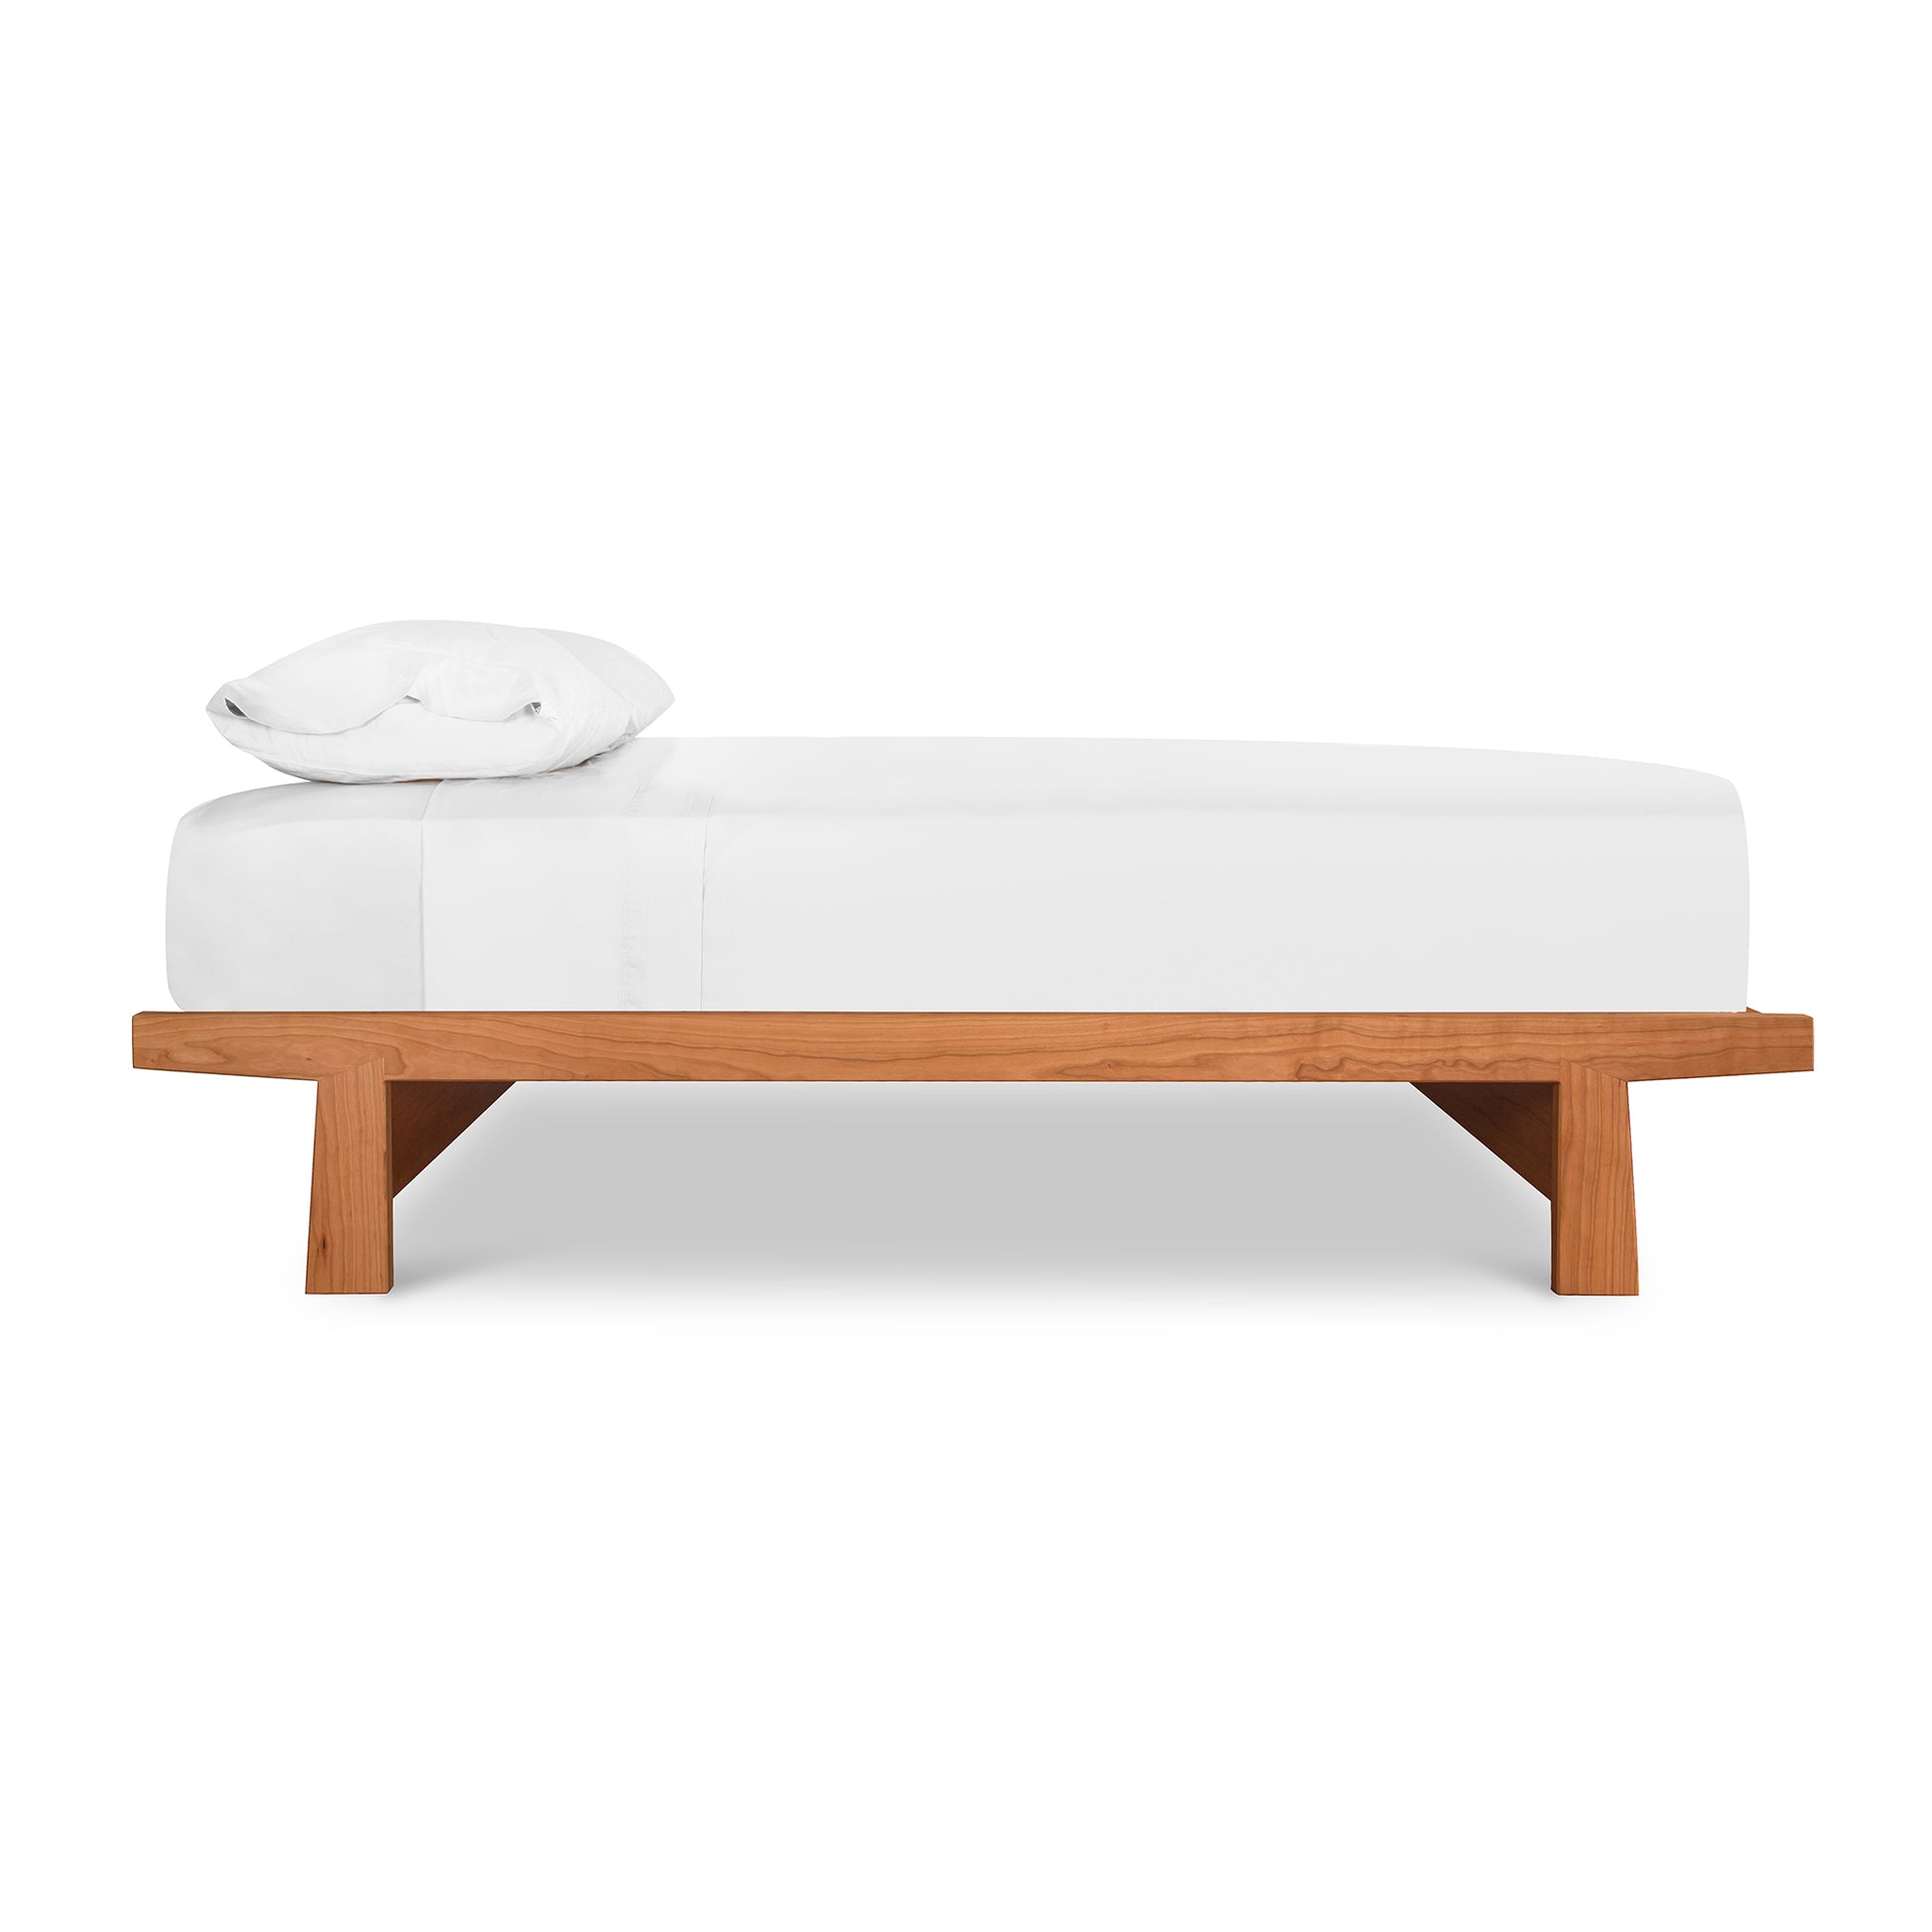 A simple modern Cherry Moon Dovetail Platform Bed with a wooden base crafted from solid, sustainably harvested woods and a white cushioned top, including a single white pillow at one end. The bed is set against a plain.